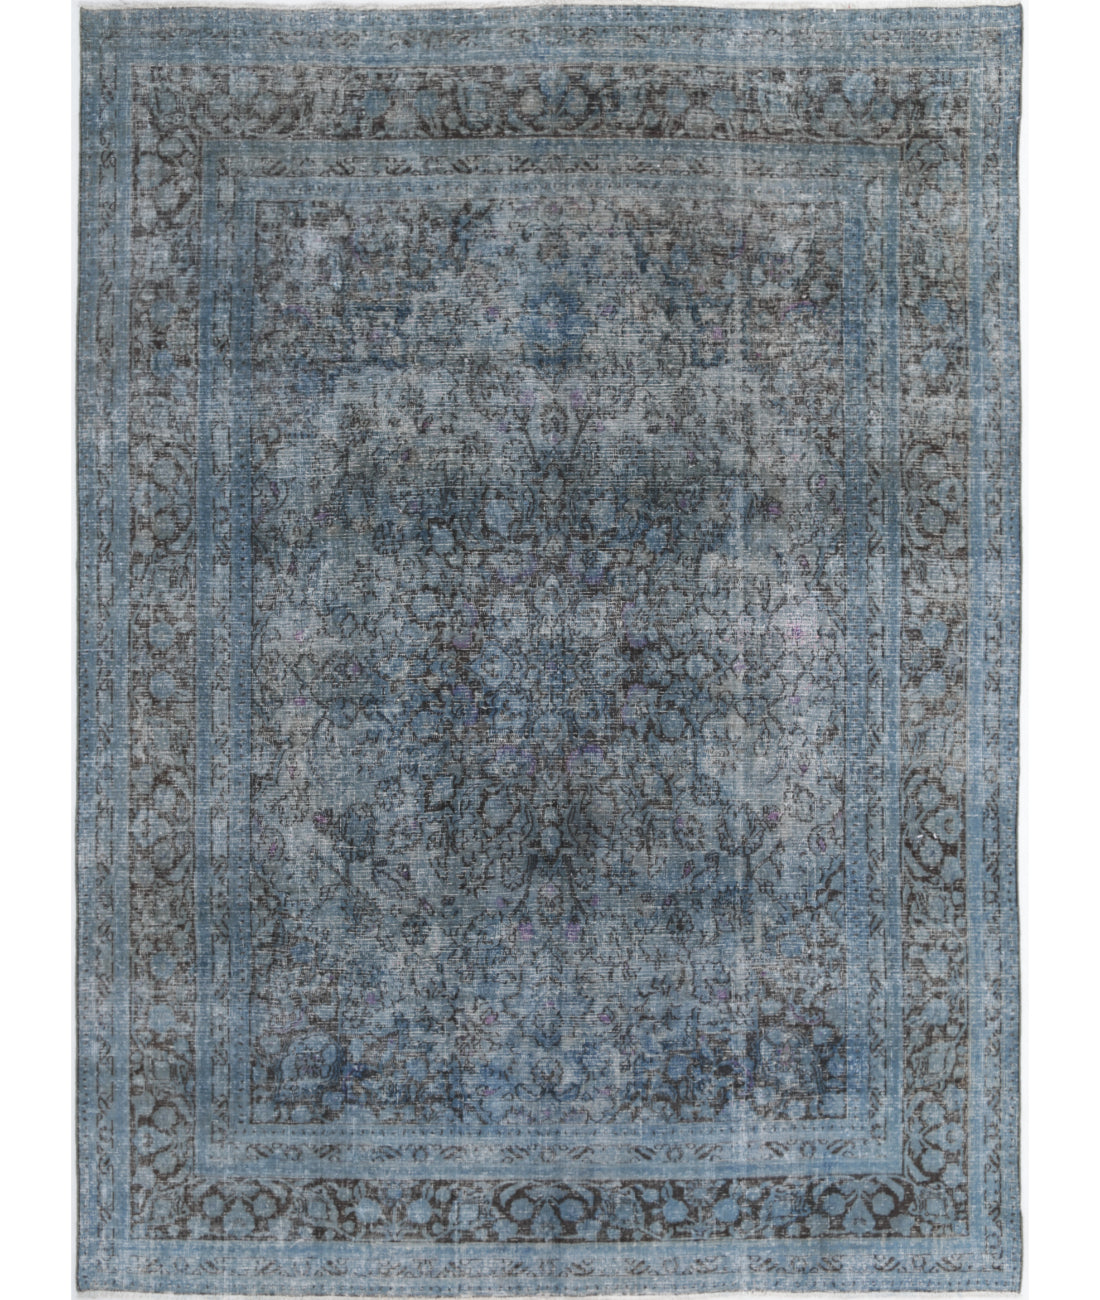 Hand Knotted Vintage Distressed Persian Kashan Wool Rug - 7'11'' x 10'10'' 7'11'' x 10'10'' (238 X 325) / Blue / Blue